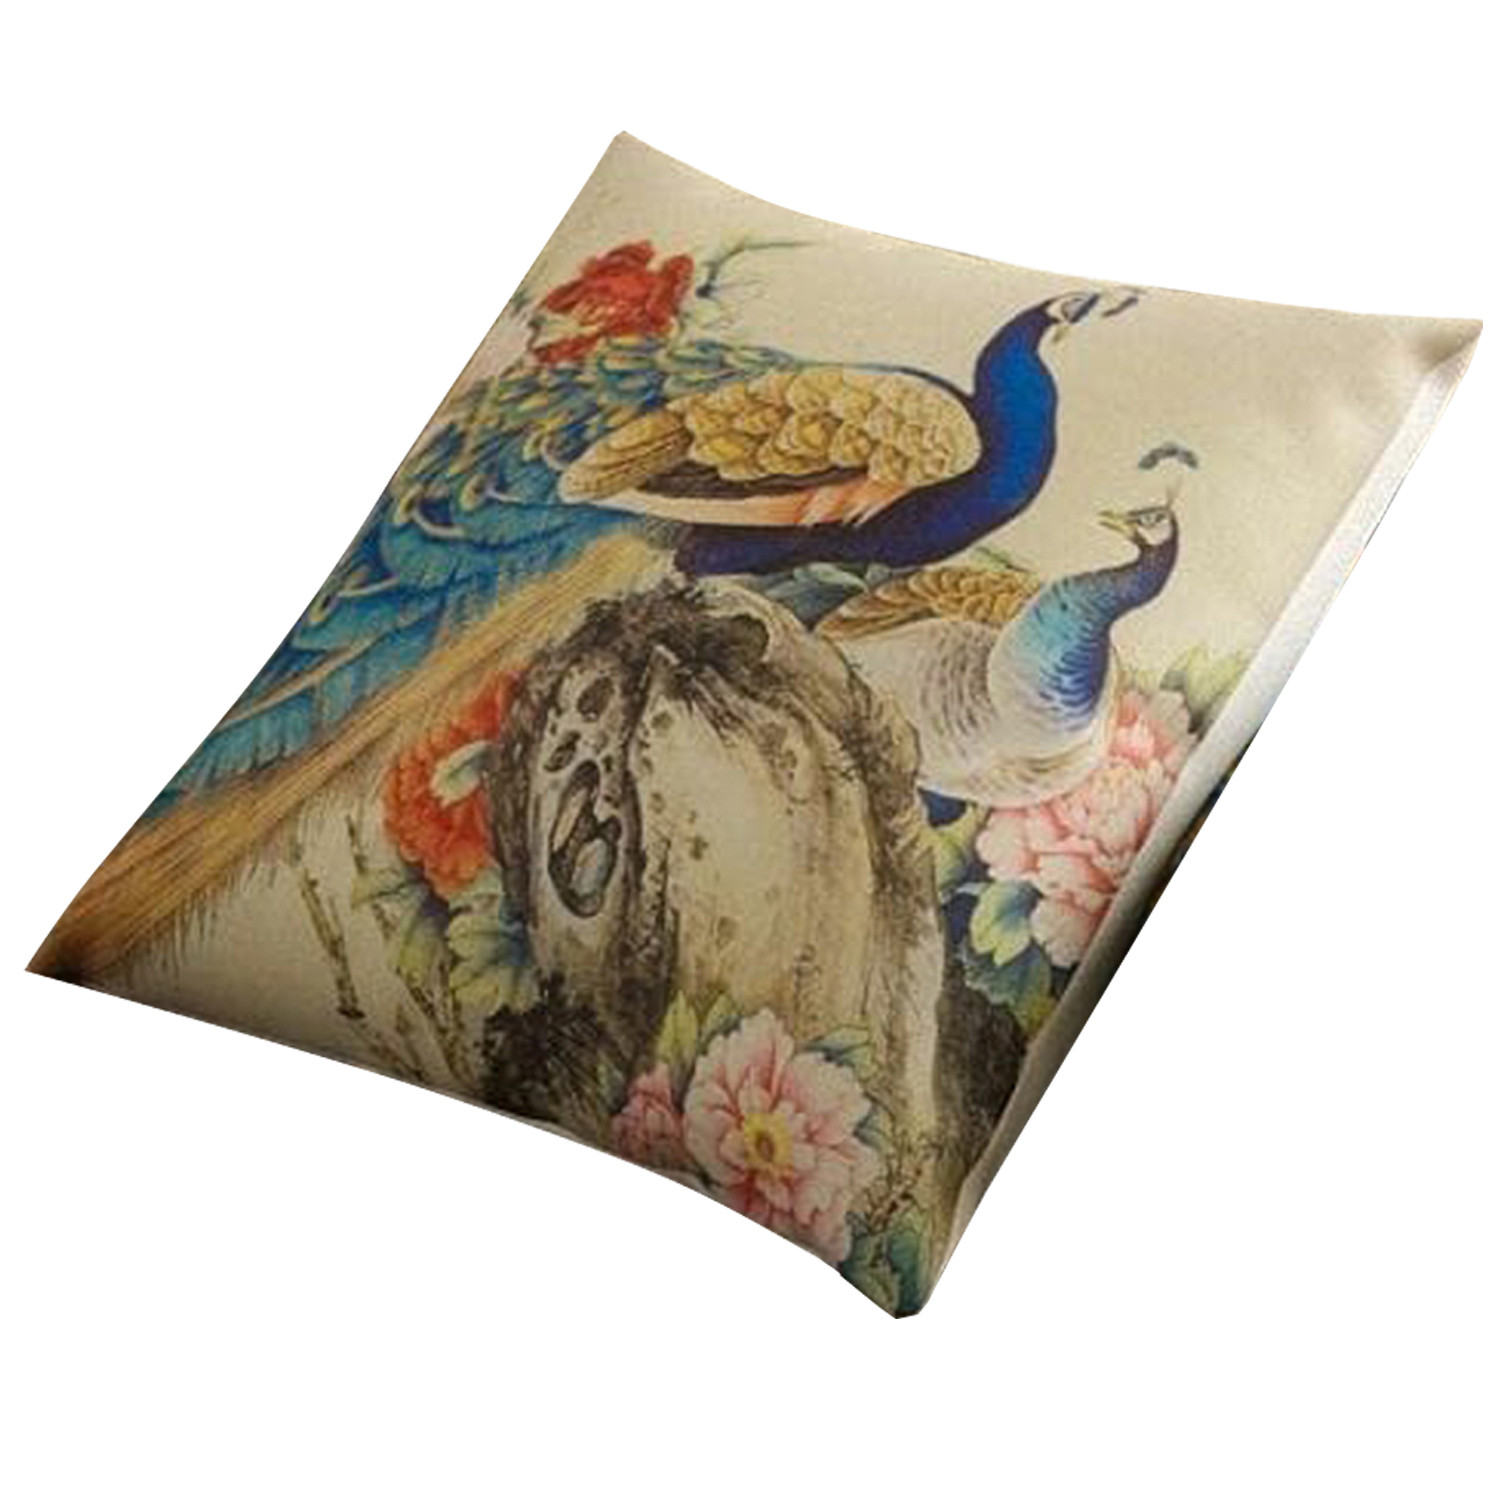 Kuber Industries Peacock Print Cushion Cover|Ractangle Cushion Covers|Sofa Cushion Covers|Cushion Covers 16 inch x 16 inch|Cushion Cover Set of 5 (Multicolor)